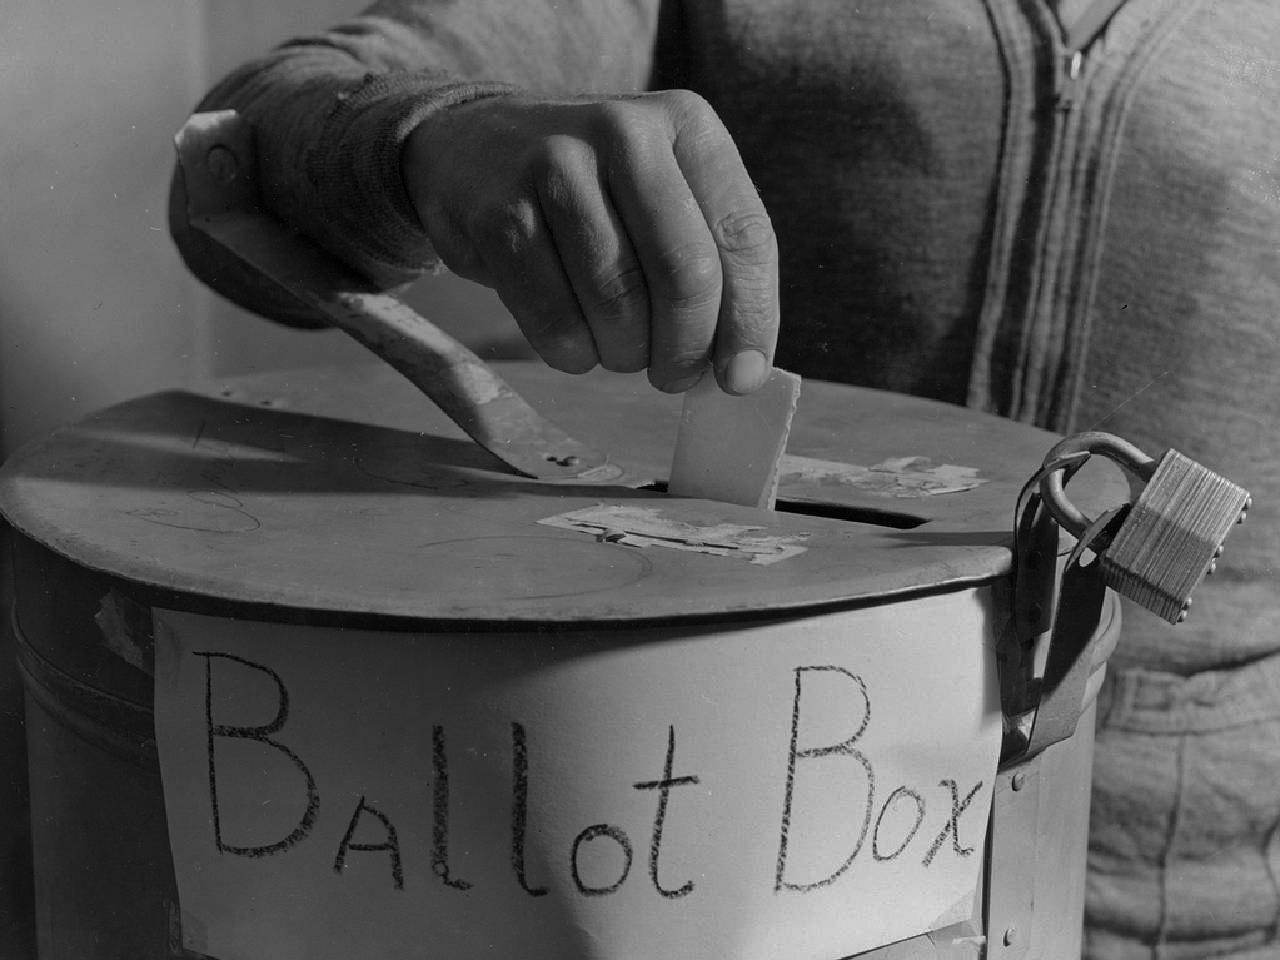 Close-up of a hand dropping a paper ballot into a cylindrical metal ballot box with a slot in the top. The box is locked with a padlock. On the front of the box are the words 'ballot box.'